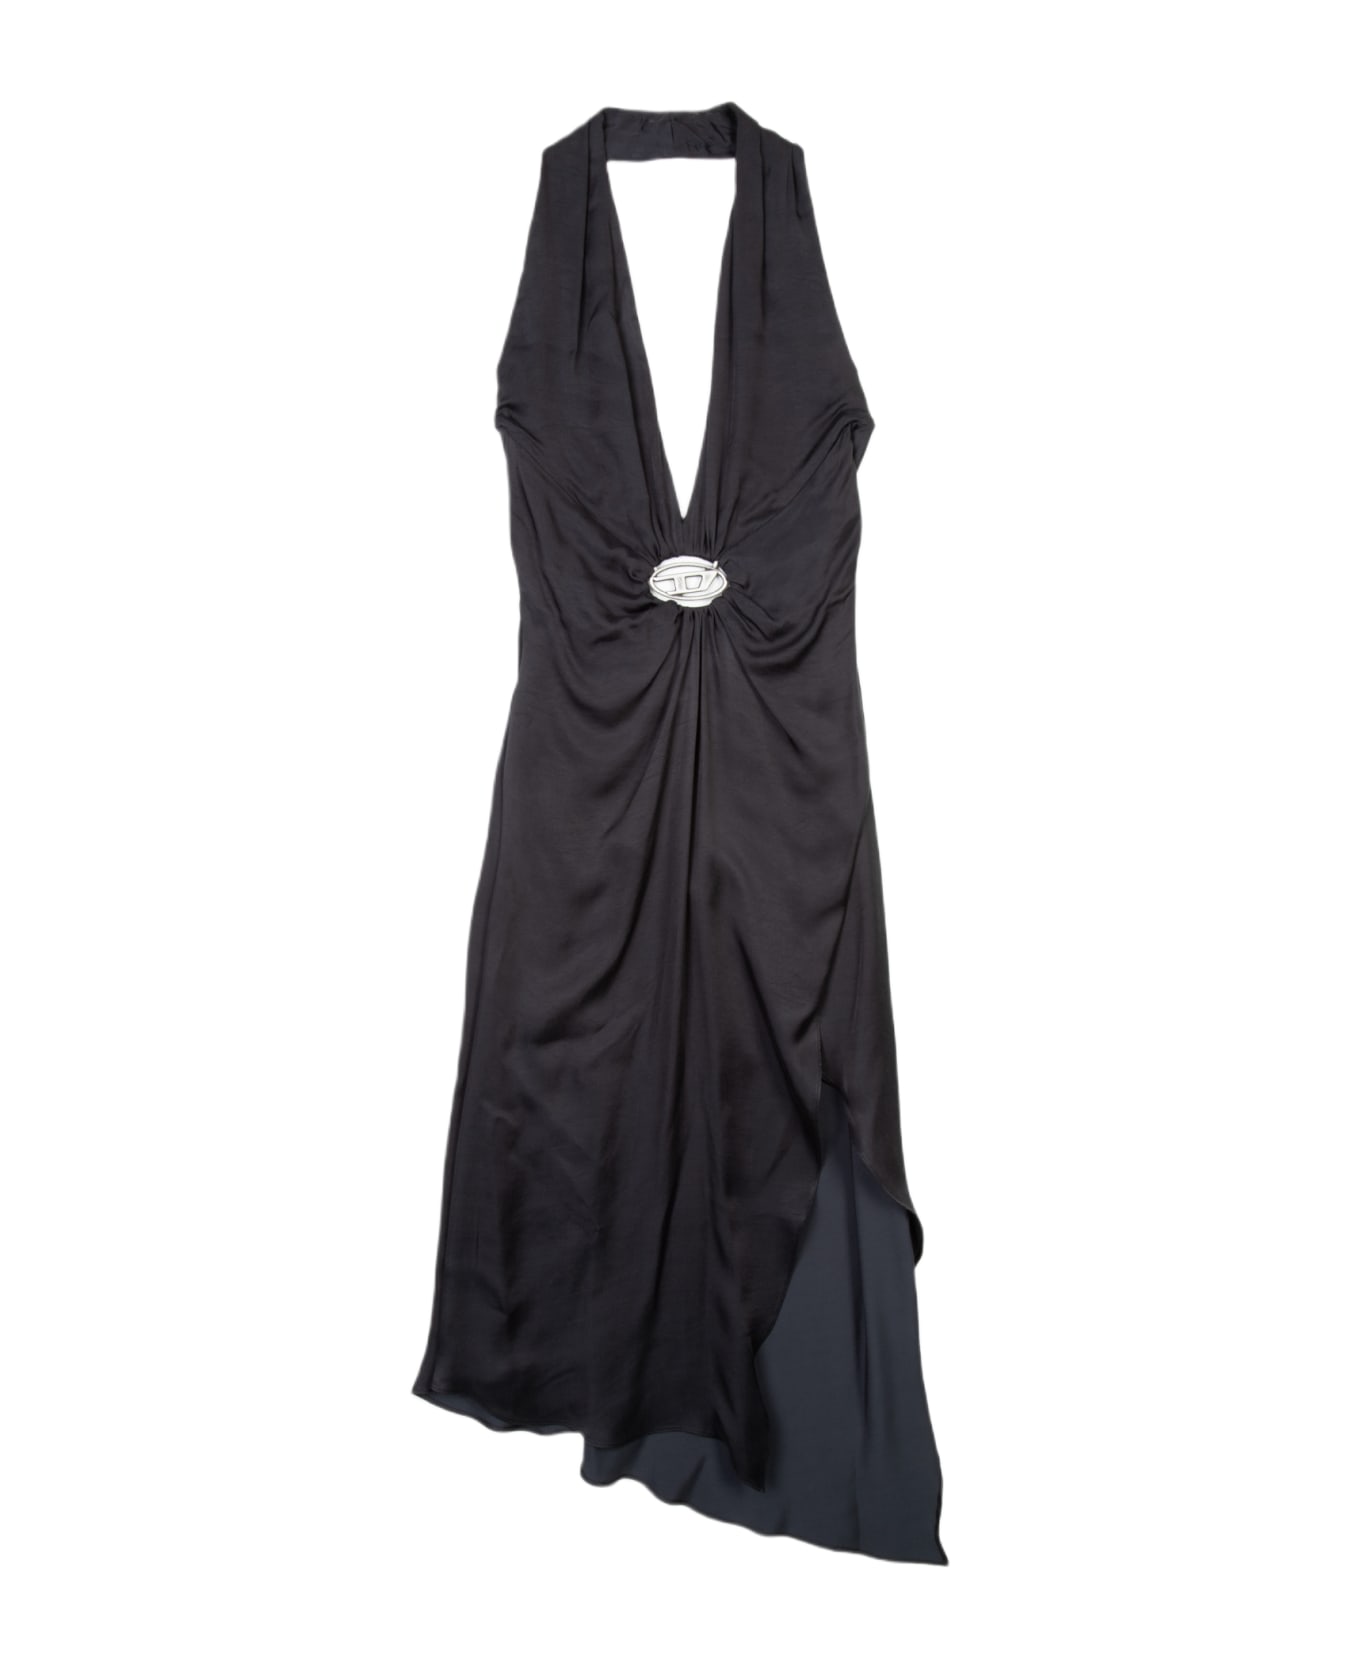 Diesel D-stant-n1 Black satin midi draped dress with Oval D - D Stant - Nero ワンピース＆ドレス